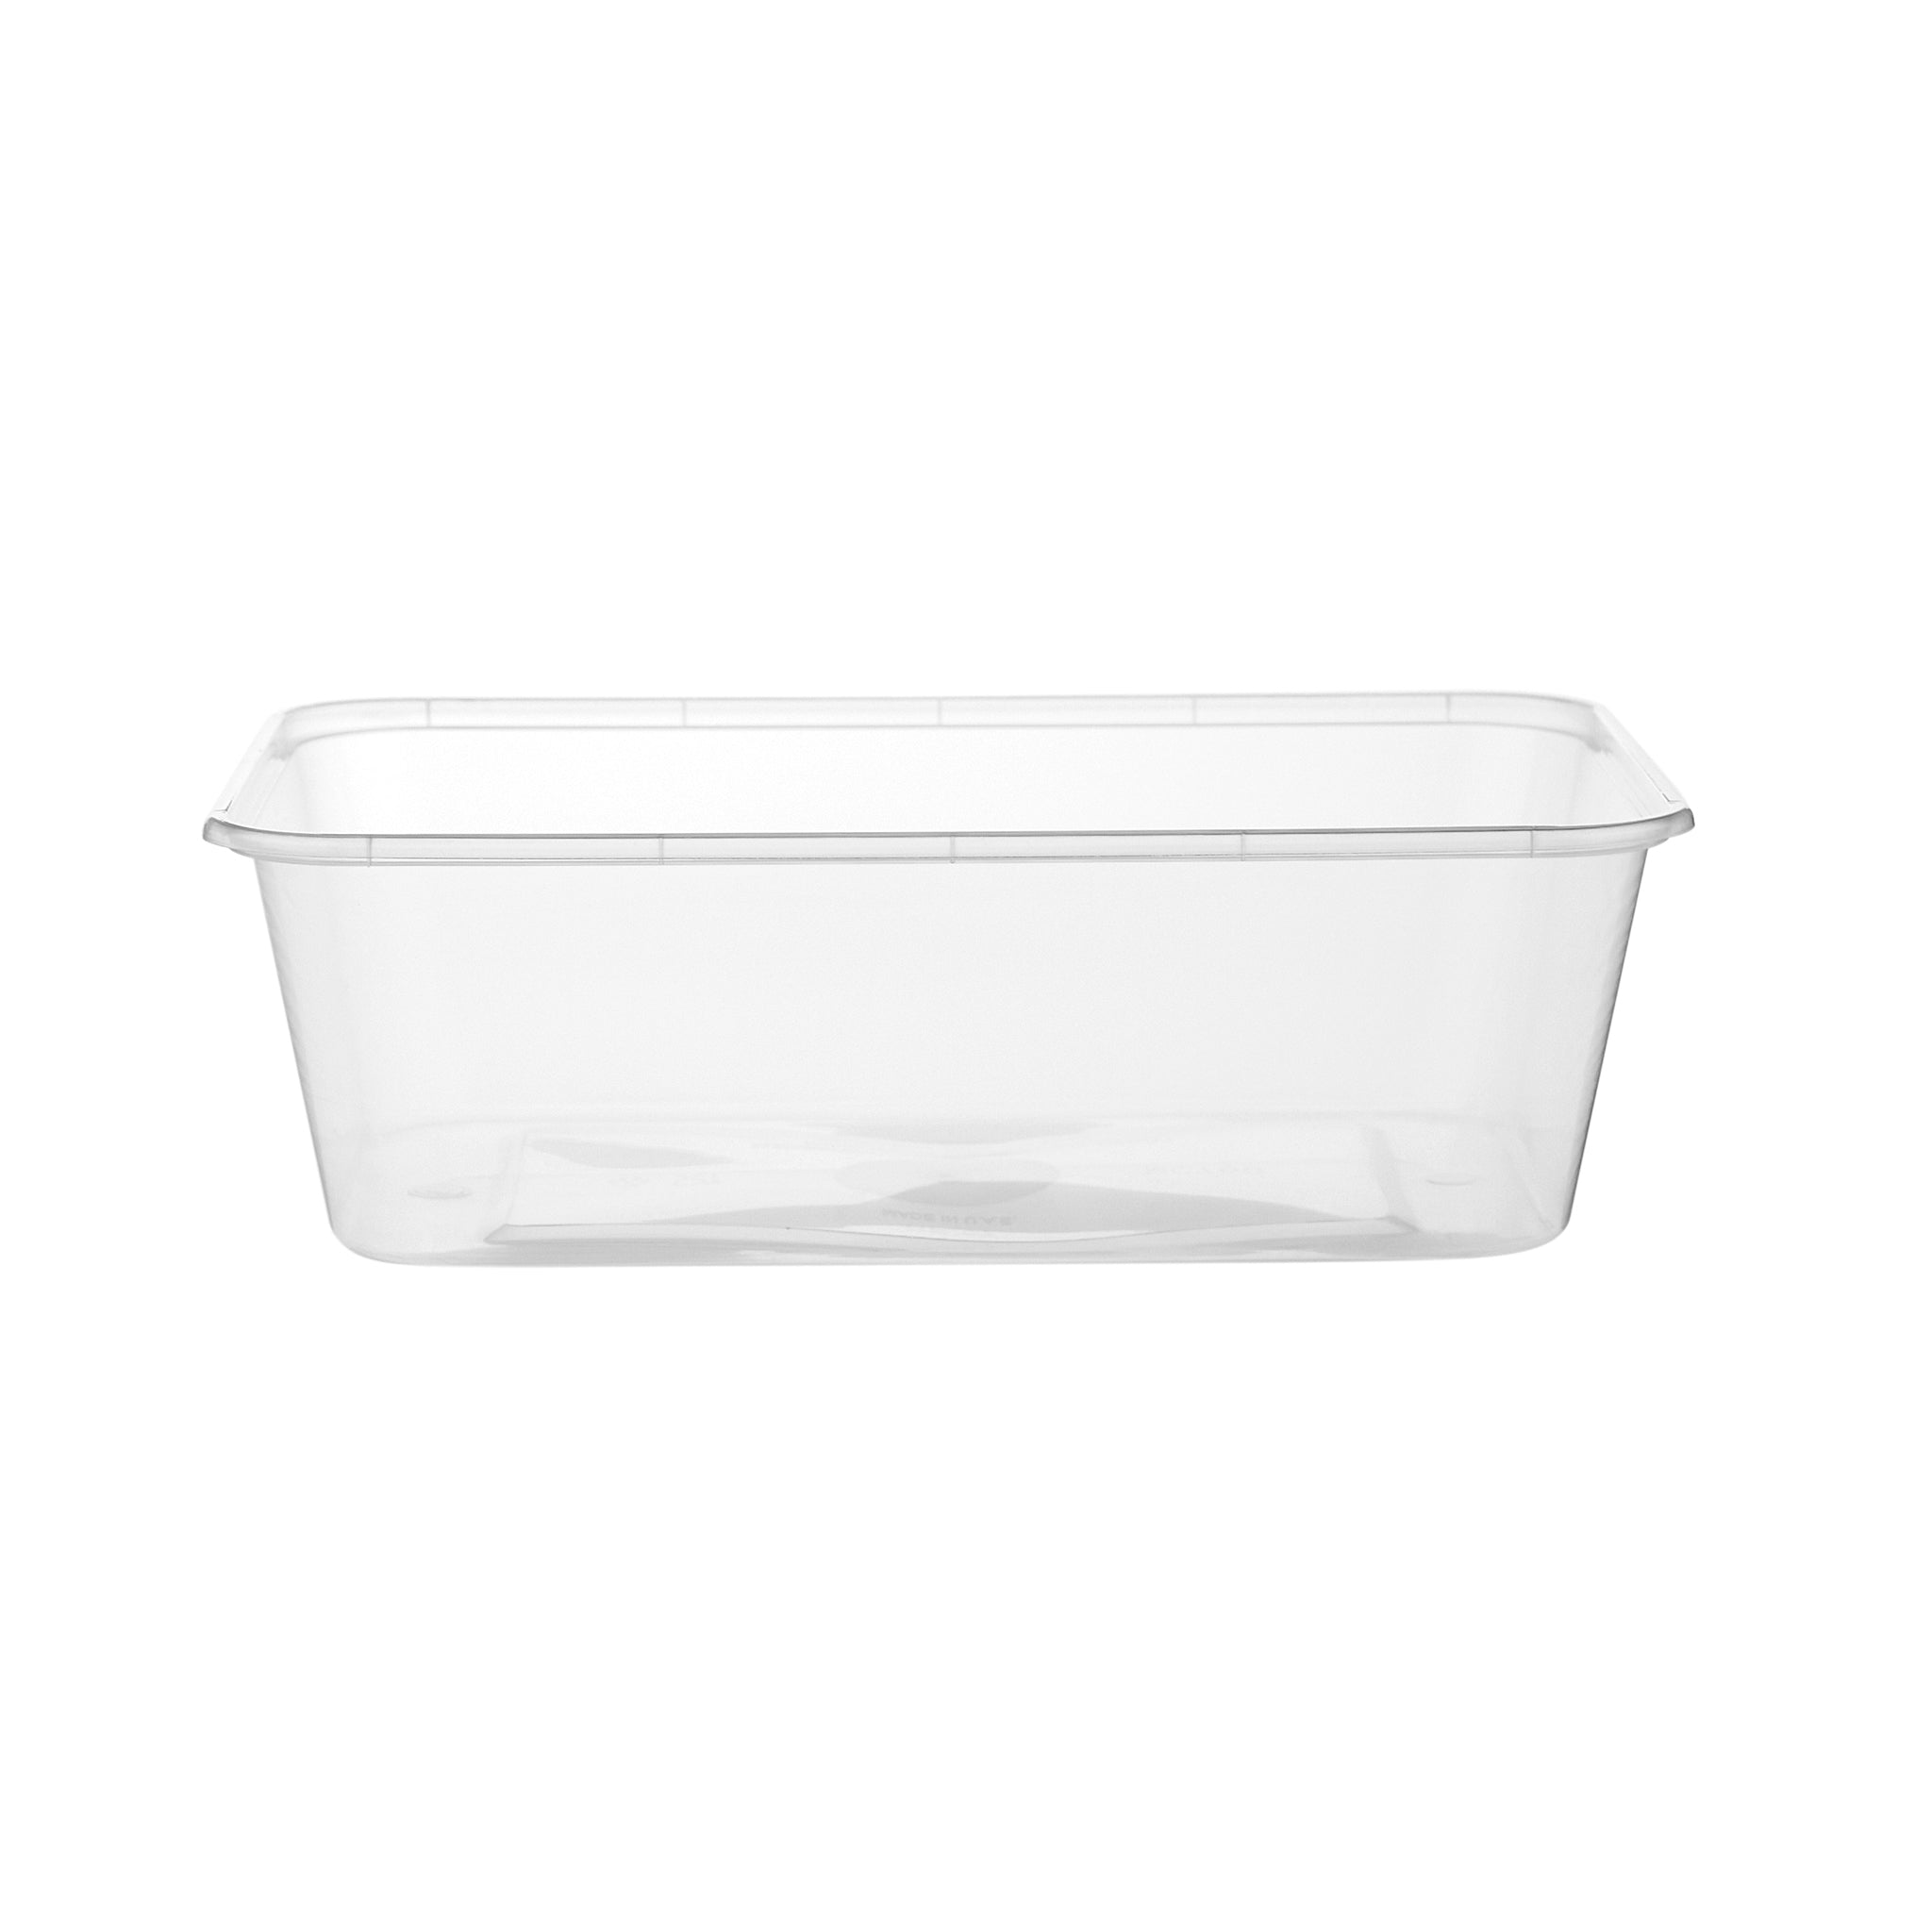 Black Plain 1000 ML Rectangular Container With Lid, For Food Storage,  Packaging Type: Box